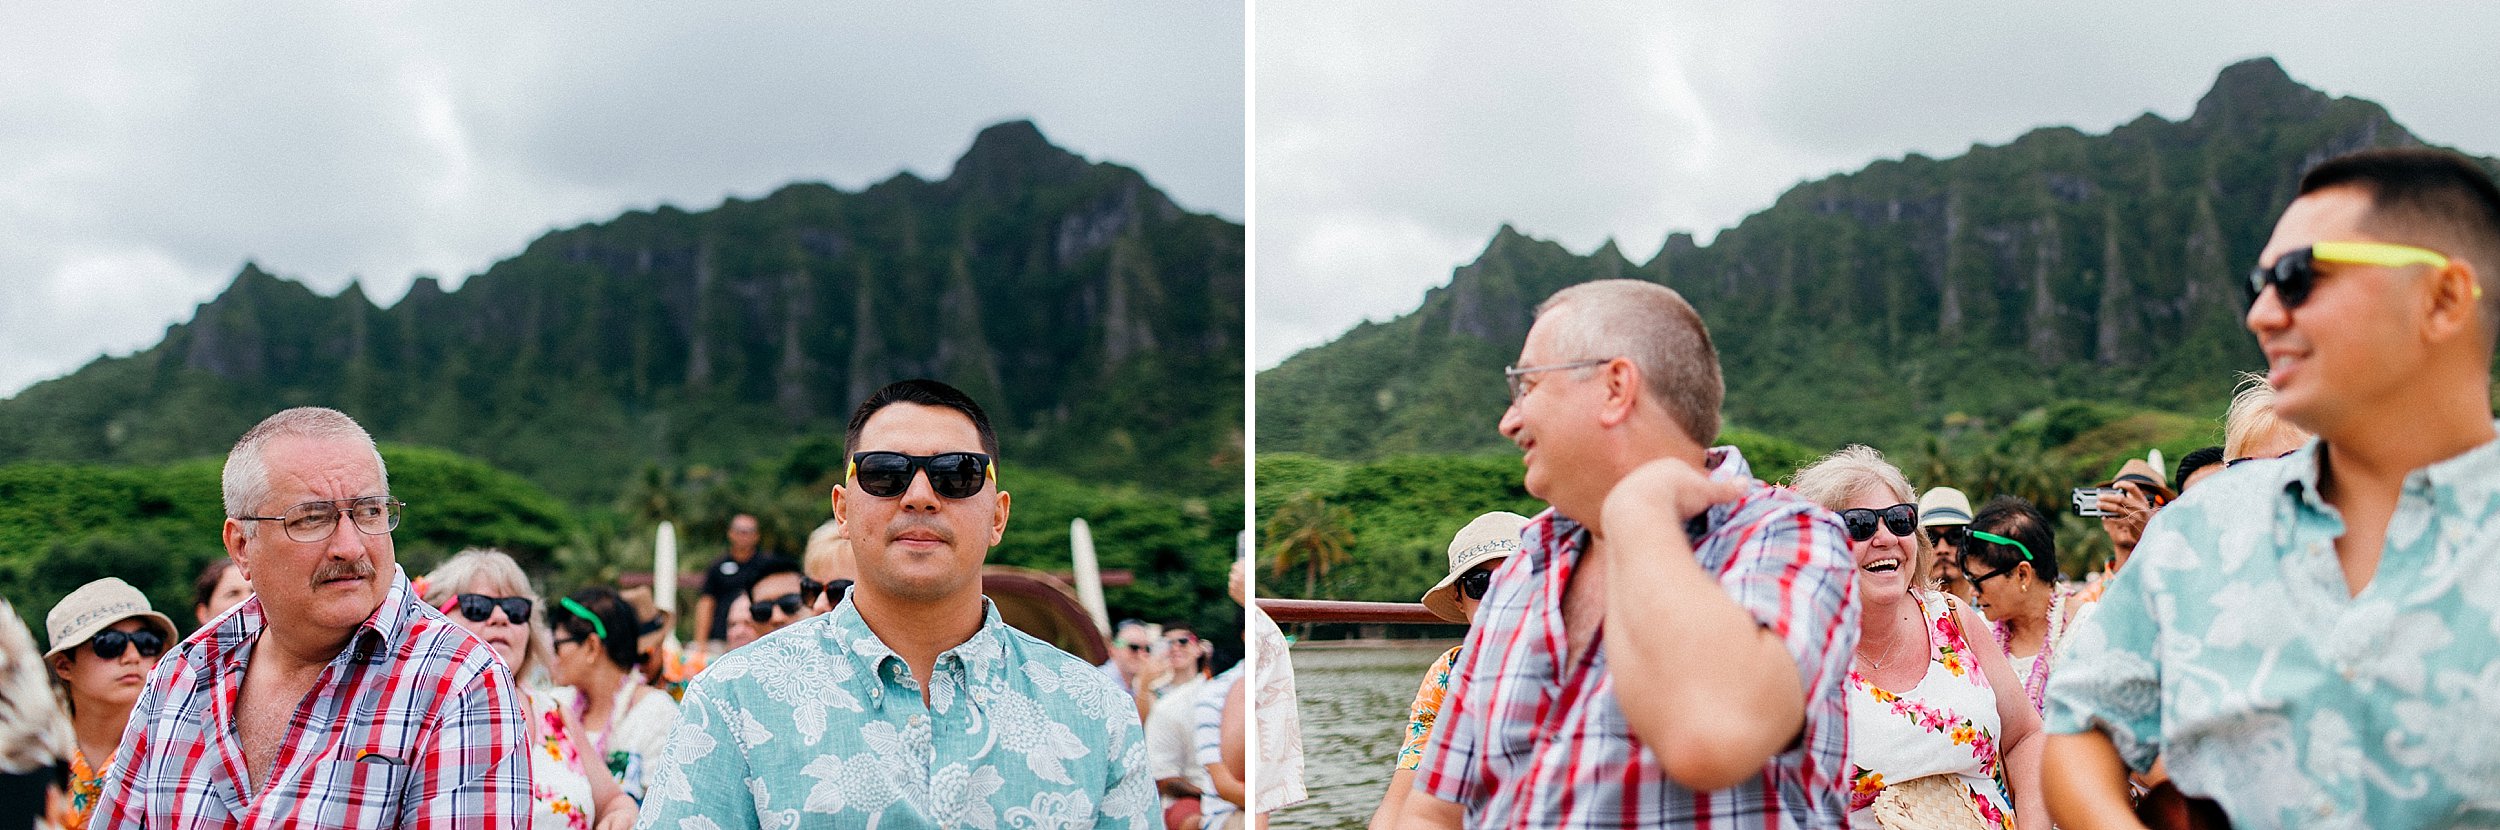  Small and Simple Vow Renewal Elopement at Kualoa Ranch's Secret Island 